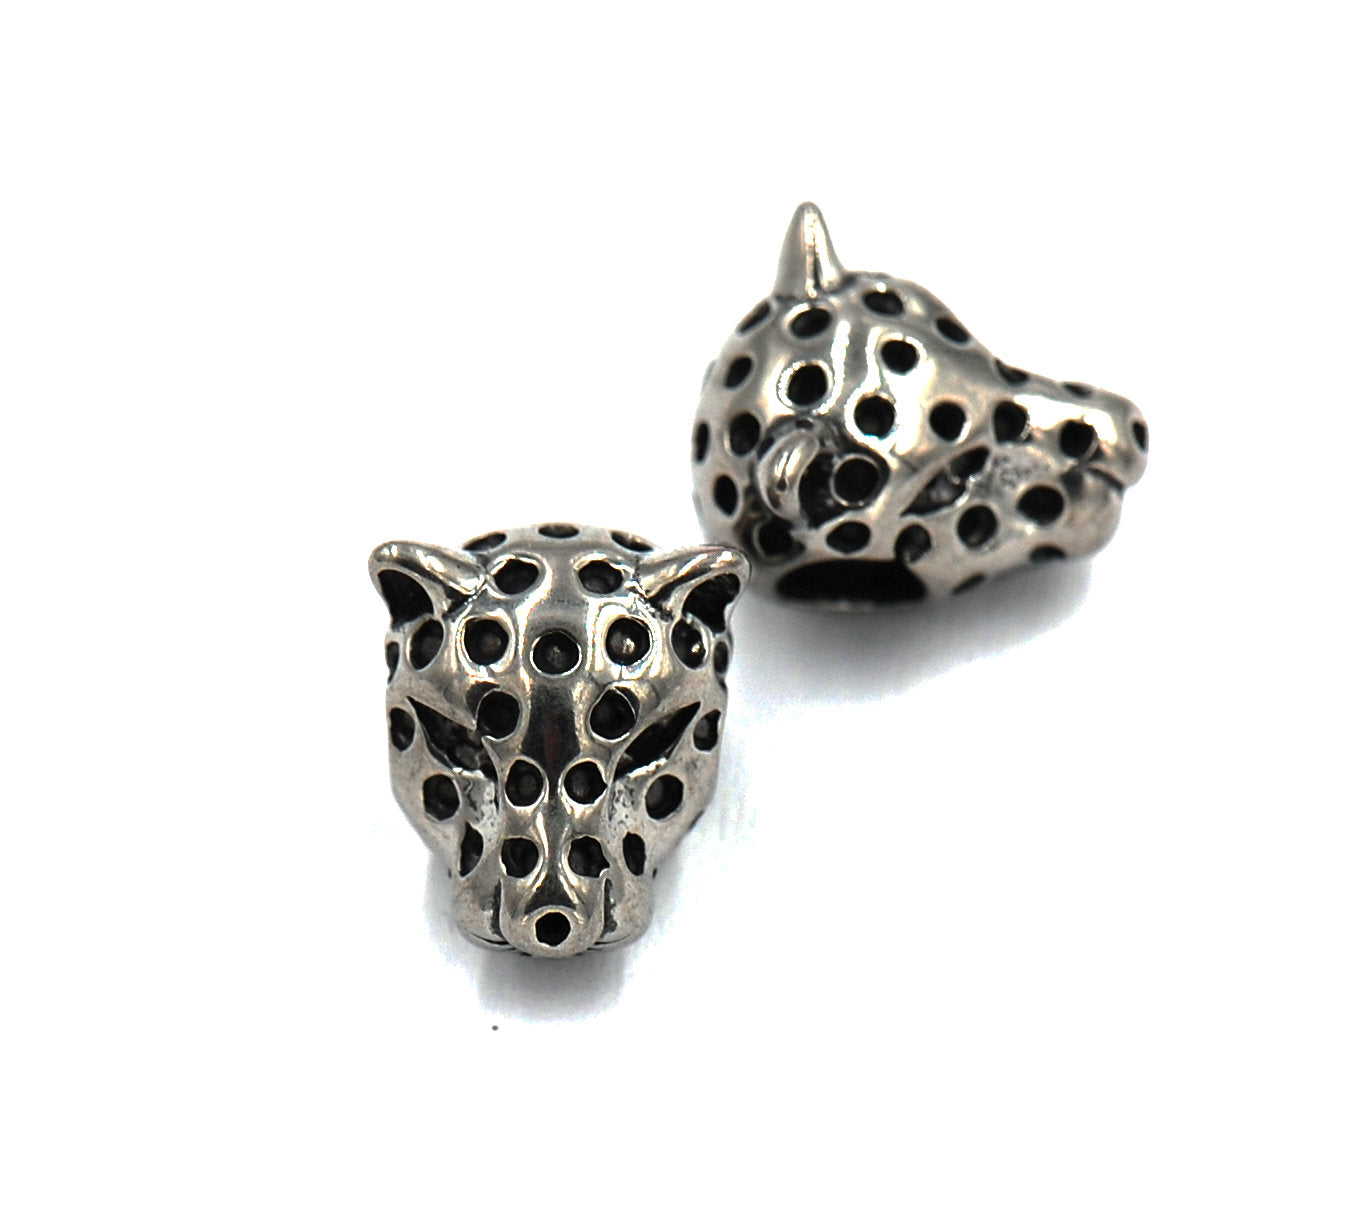 304 Stainless Steel Beads, Leopard Head, Antique Silver Size: about 10mm wide, 13mm long -1pc